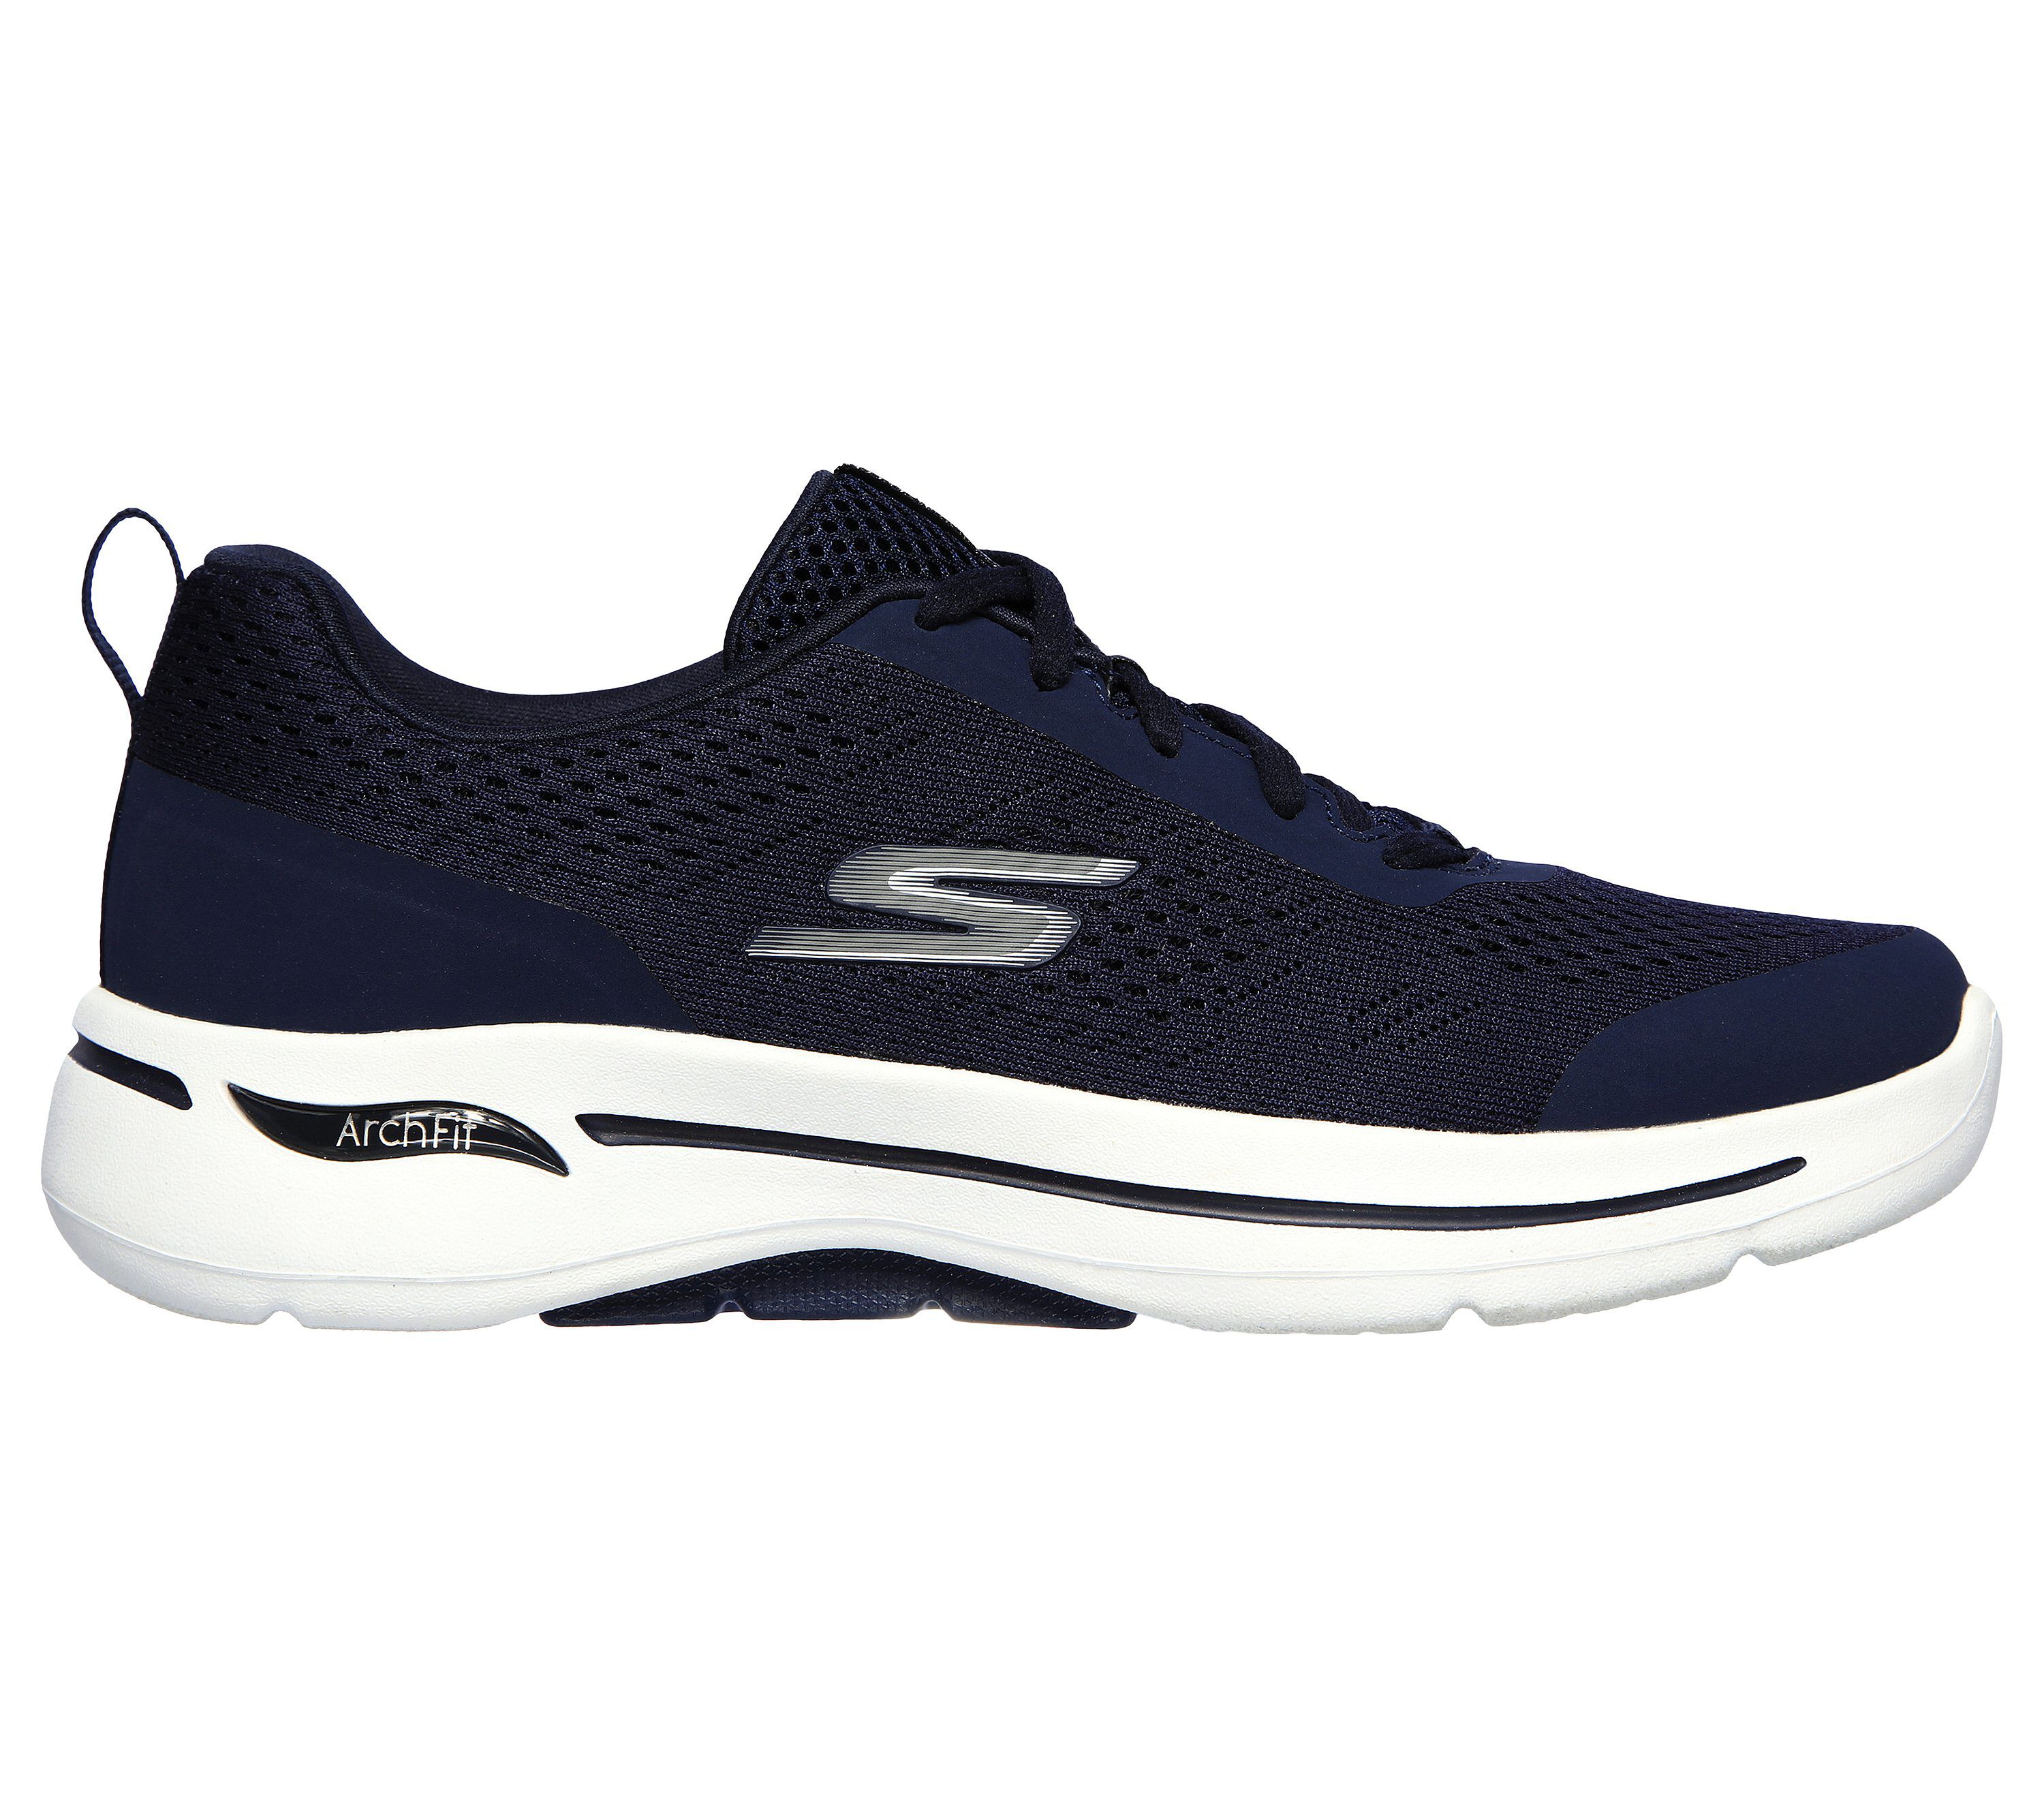 Skechers Go Walk Arch Fit - Motion Bree - Navy Polyester